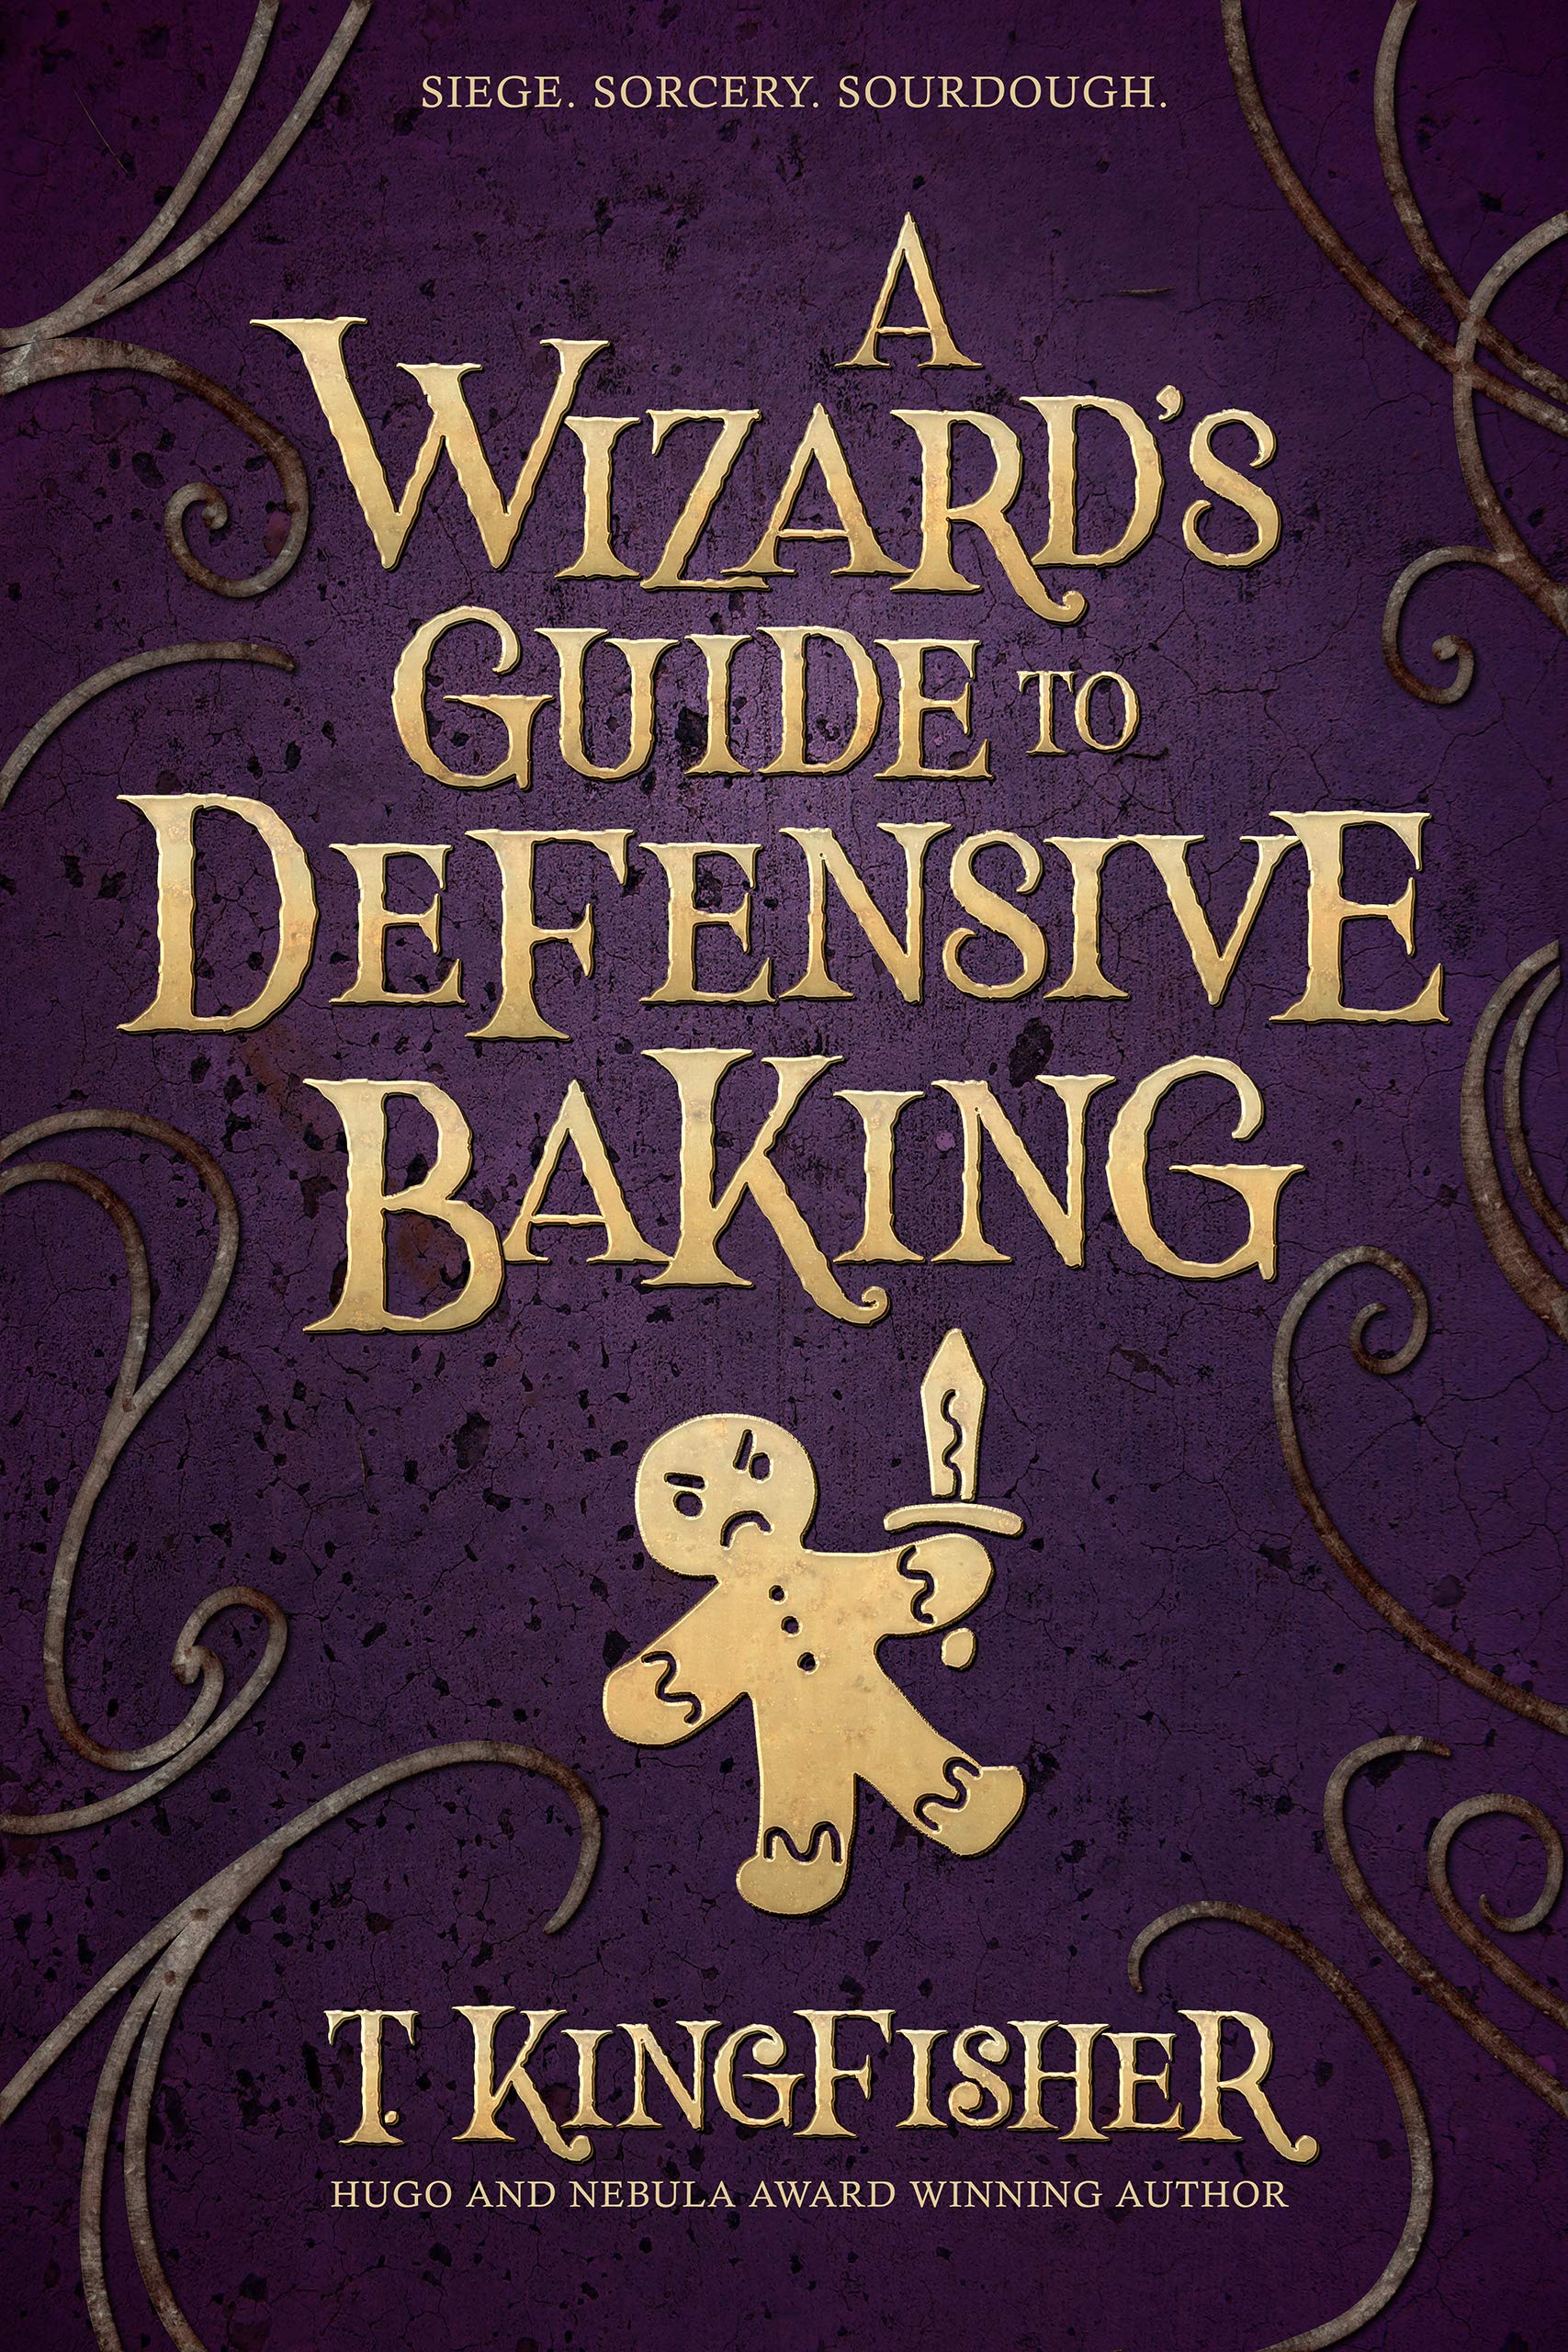 A Wizard’s Guide to Defensive Baking by T. Kingfisher